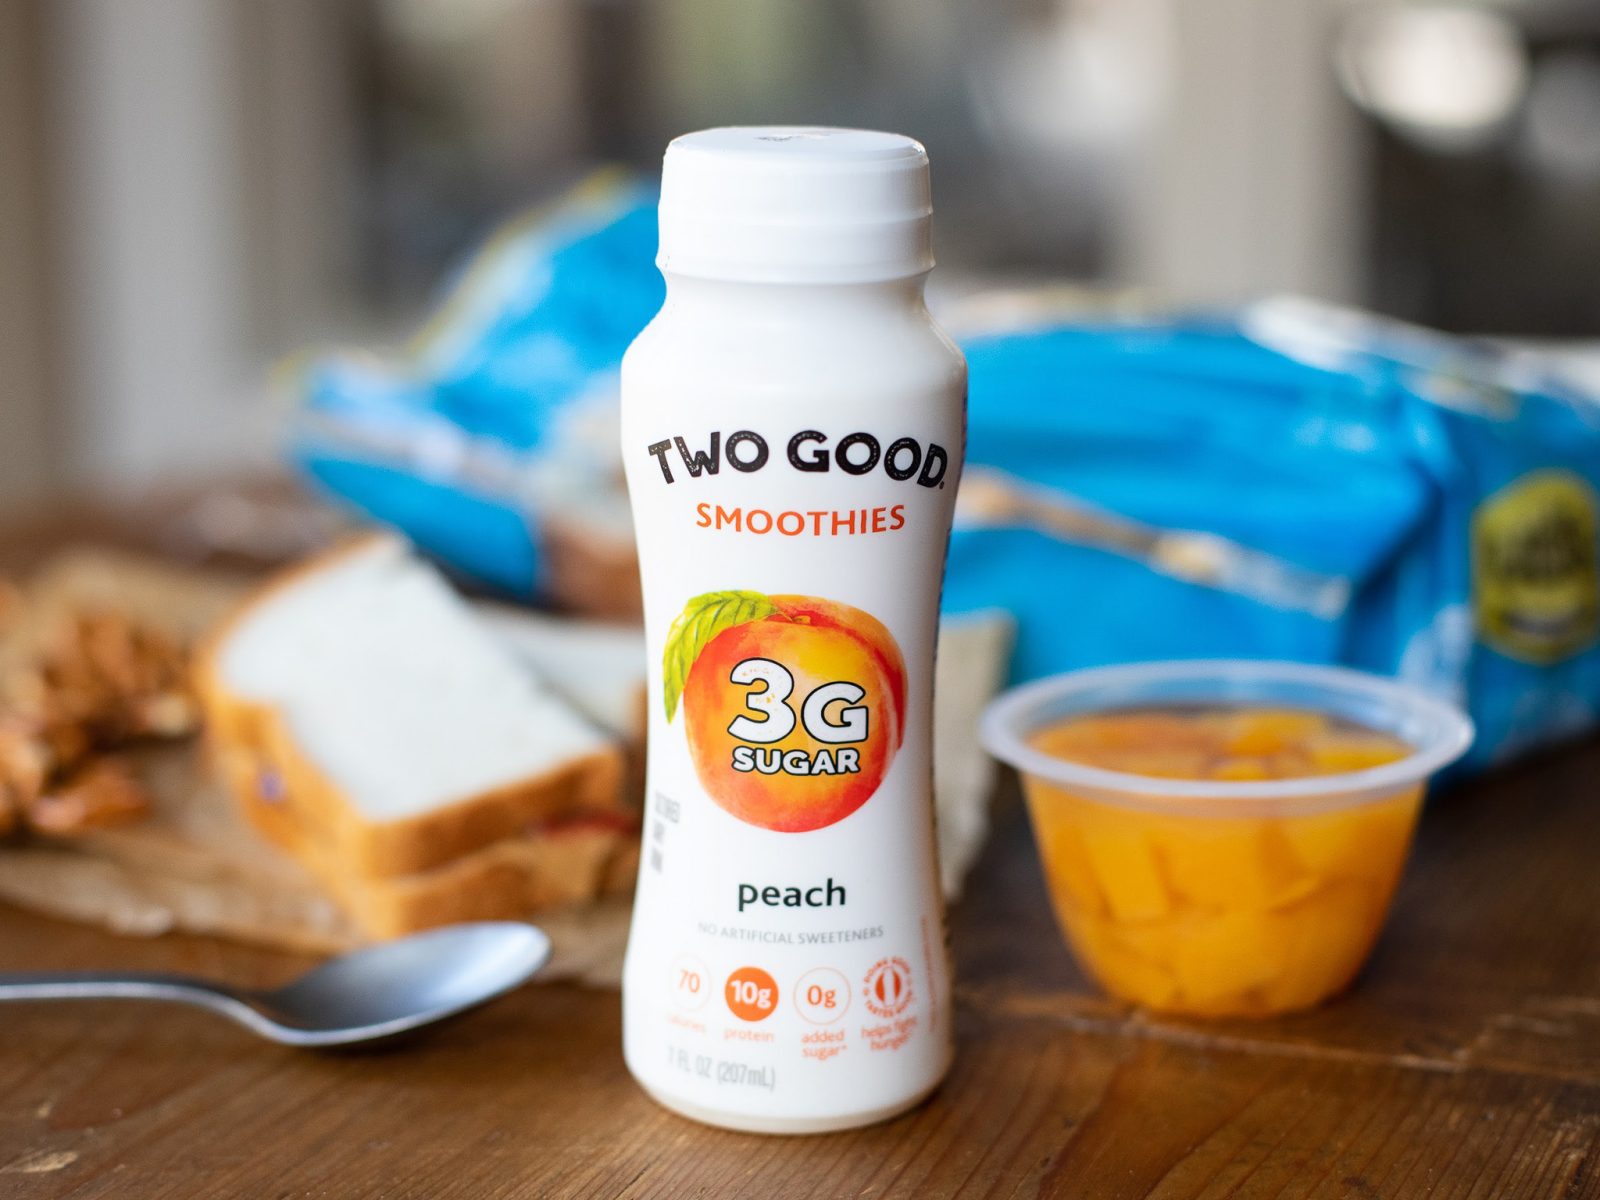 Get Two Good Smoothies For As Low As 92¢ At Kroger